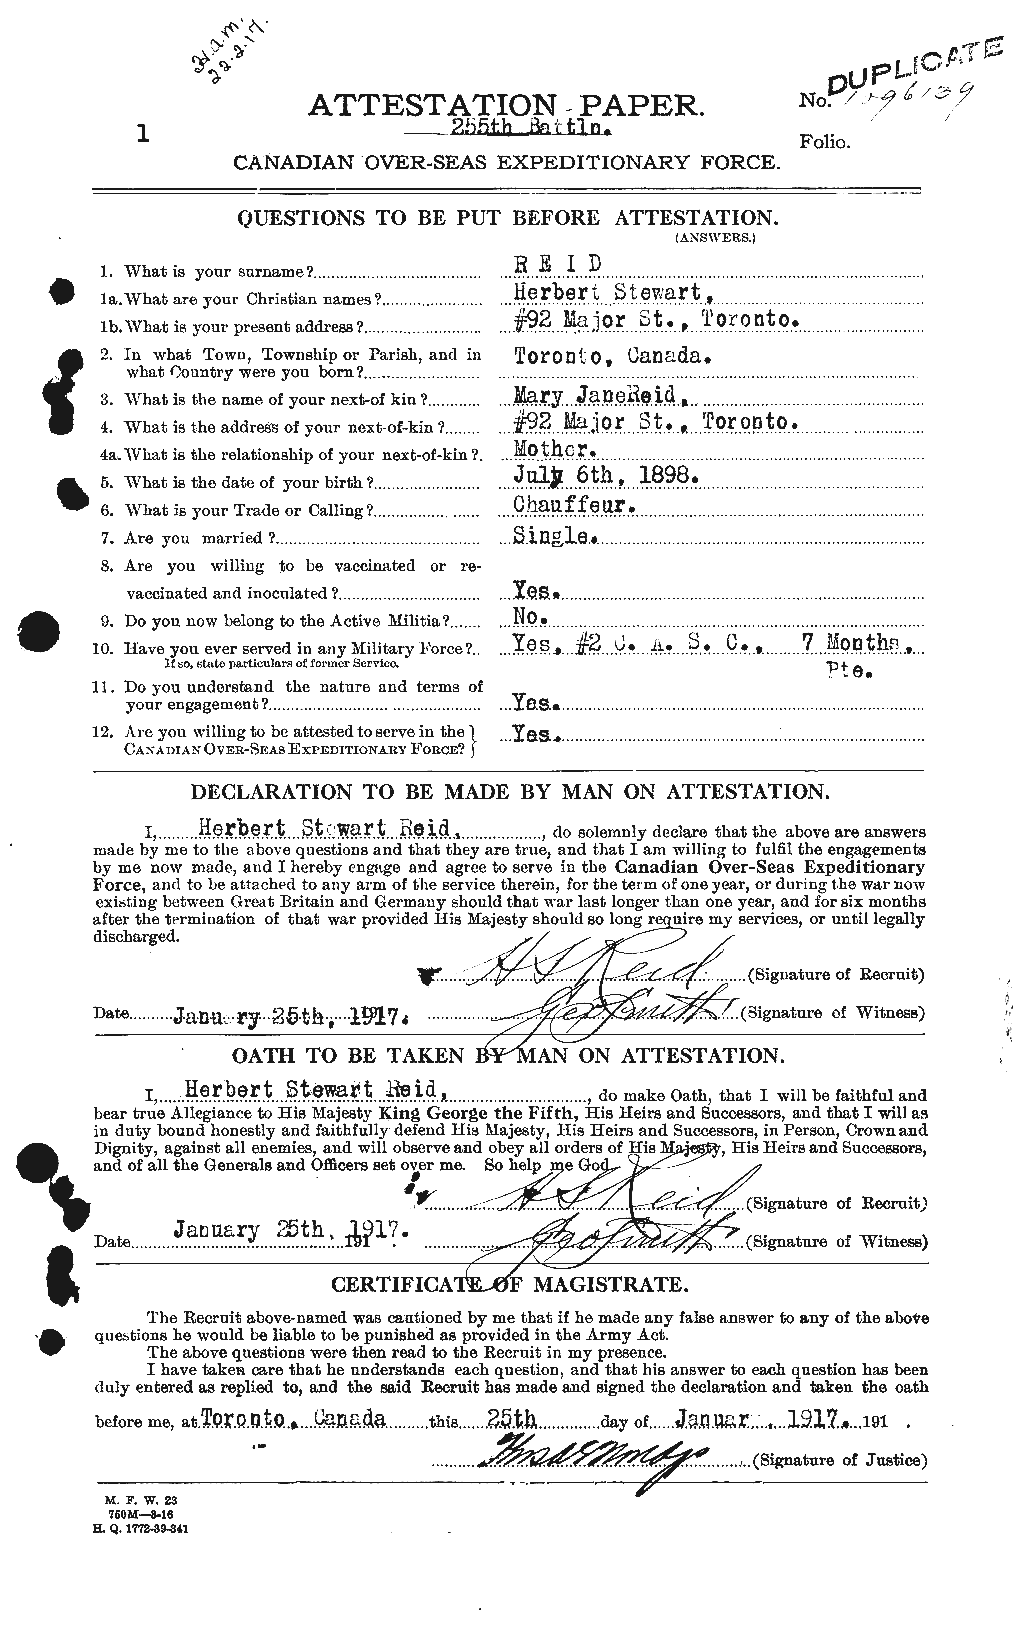 Personnel Records of the First World War - CEF 598609a